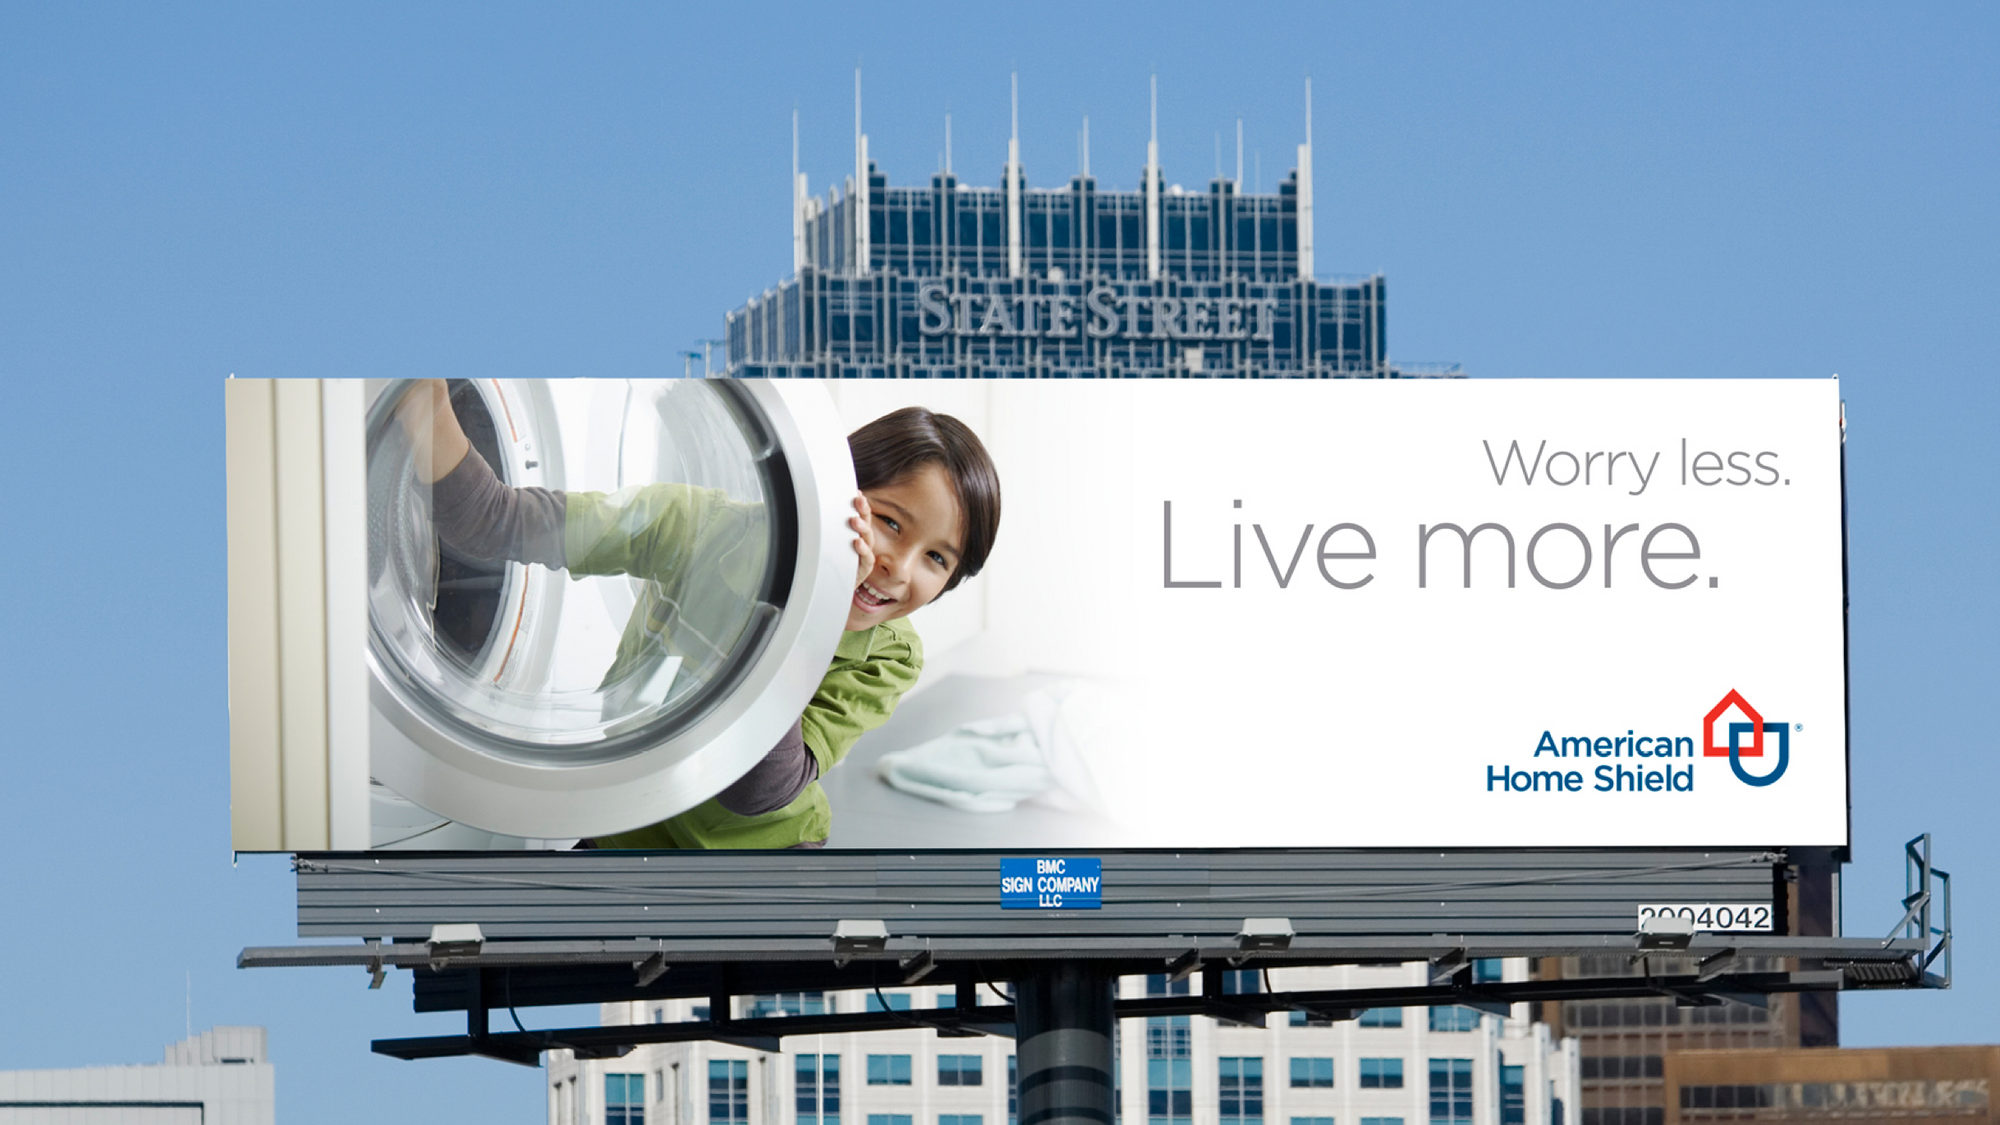 American Home Shield billboard design with child opening washer, logo and text - Worry less. Live more.